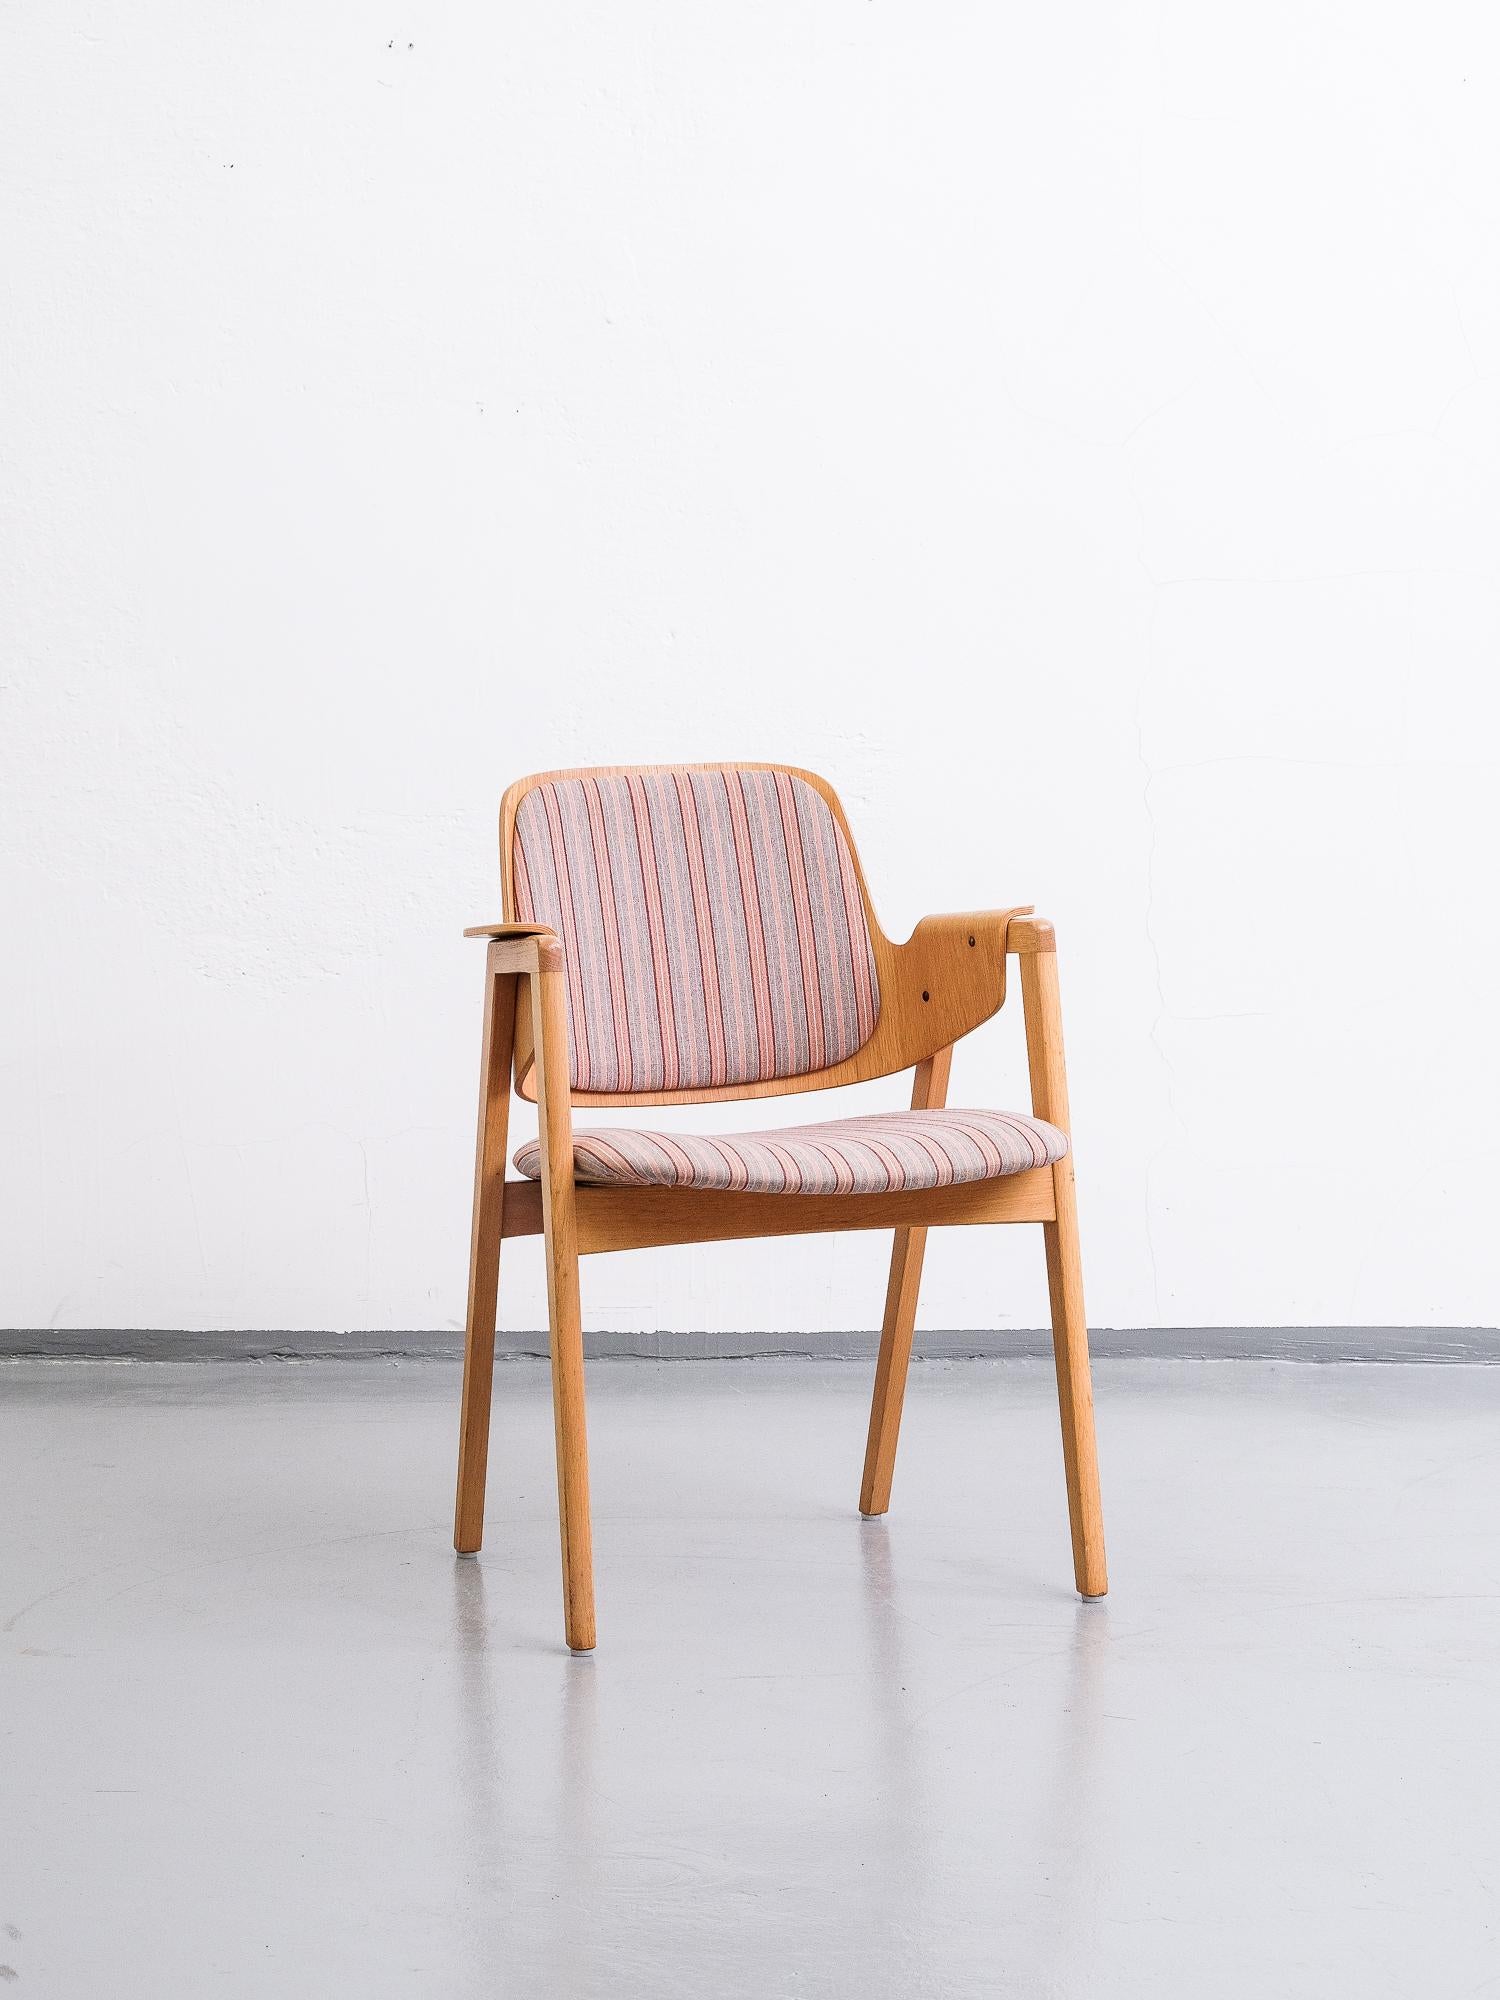 Scandinavian armchair designed by Elias Barup for Gärsnäs, 1960s.
Armchair in beech with striped upholstery. Very good used condition, with normal patina.